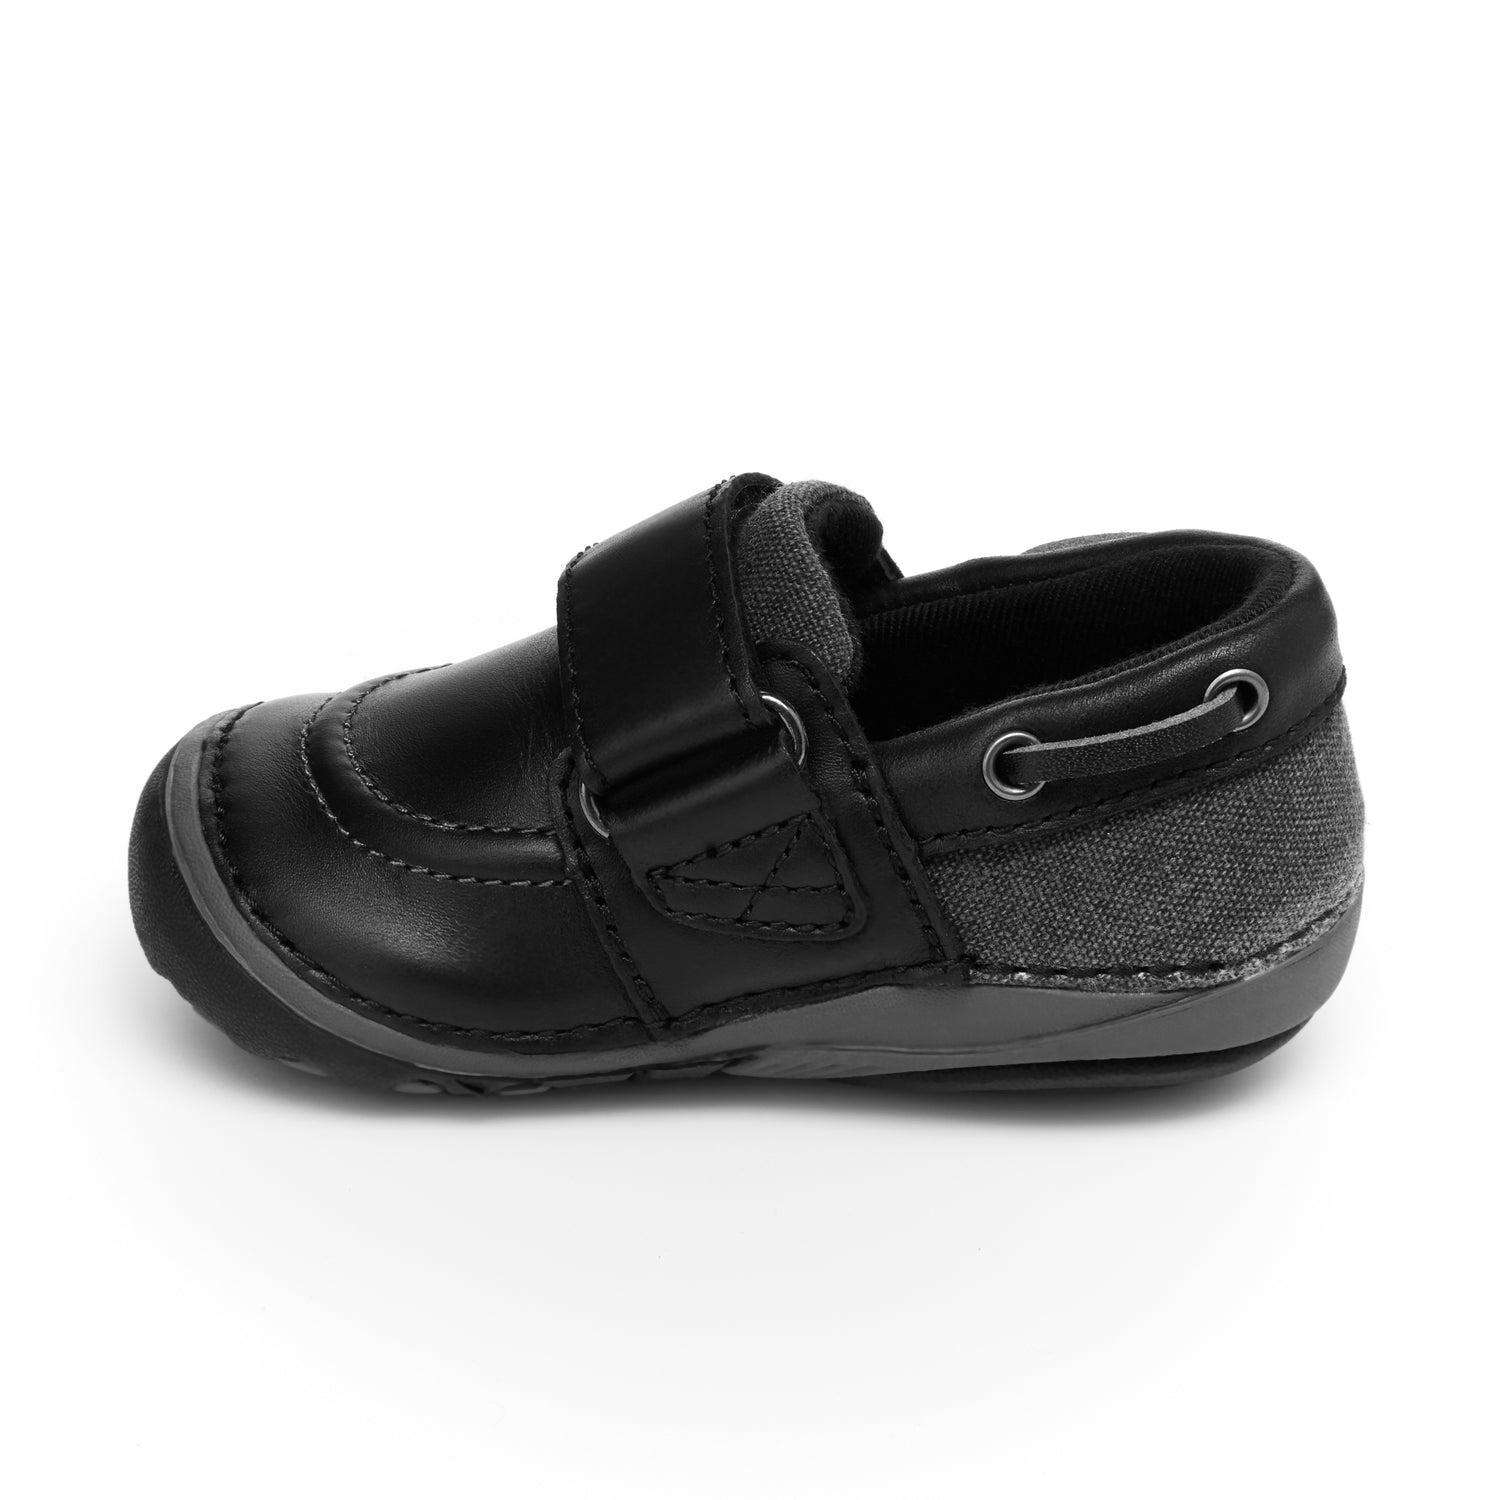 Wally Loafer Black